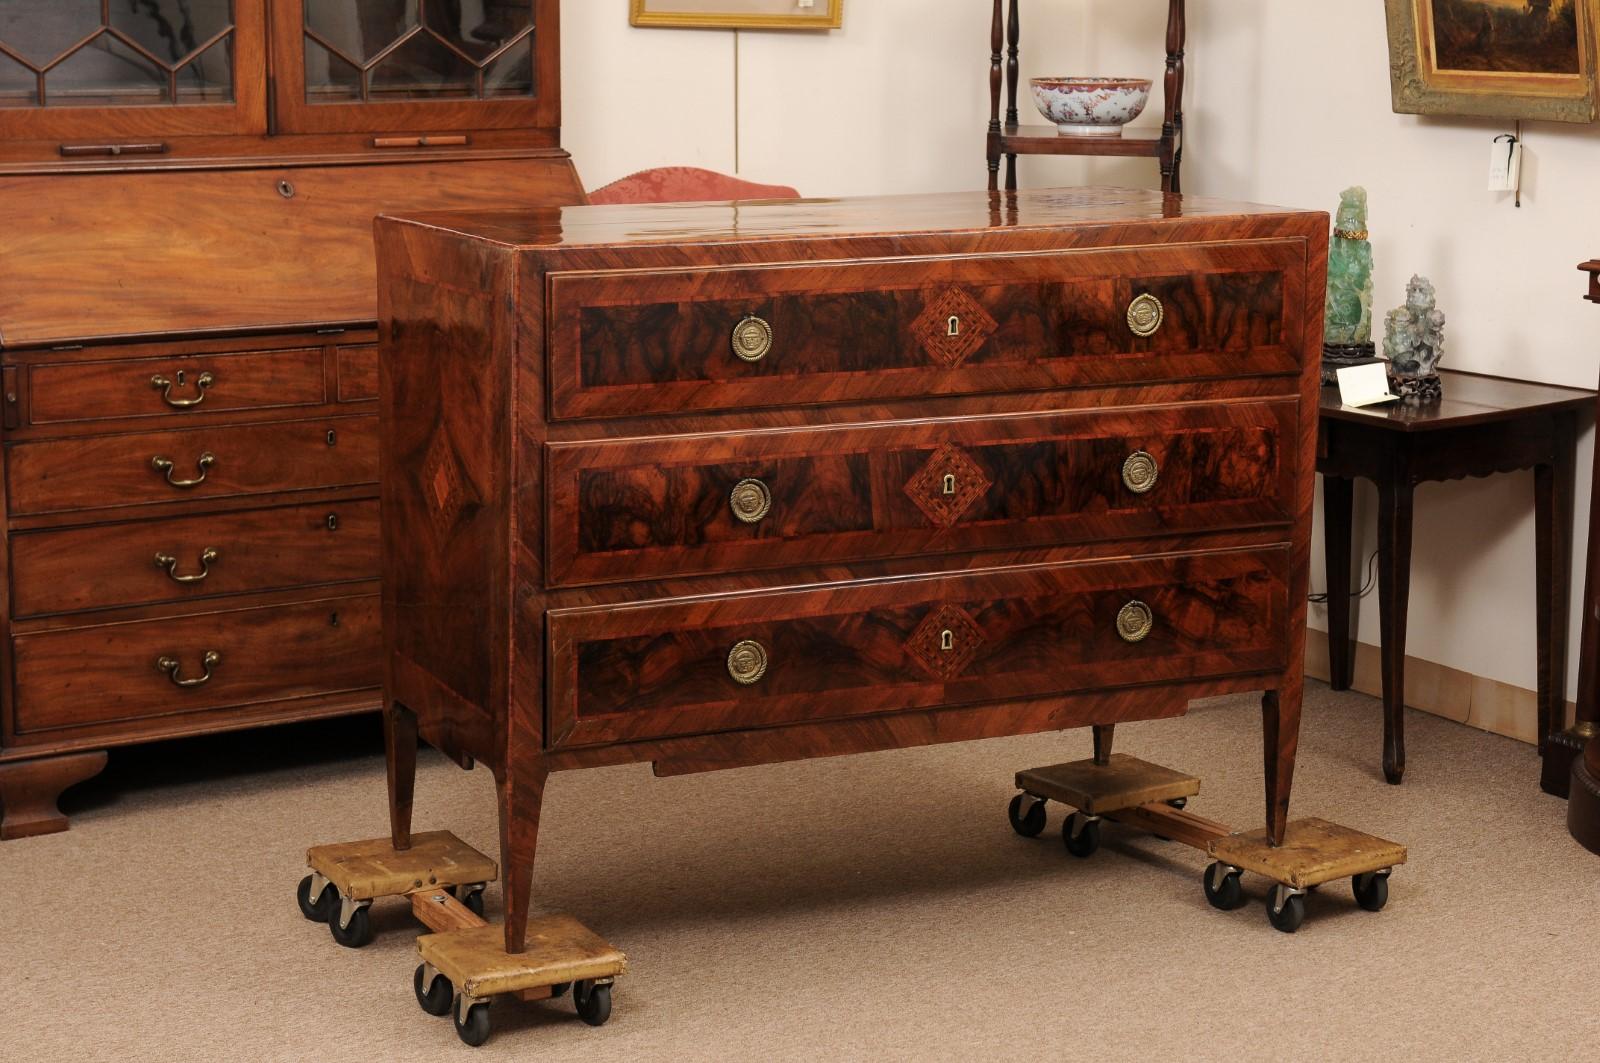 Large Late 18th Century Italian Neoclassical Walnut Commode with 3 Drawers & Parquetry Inlay